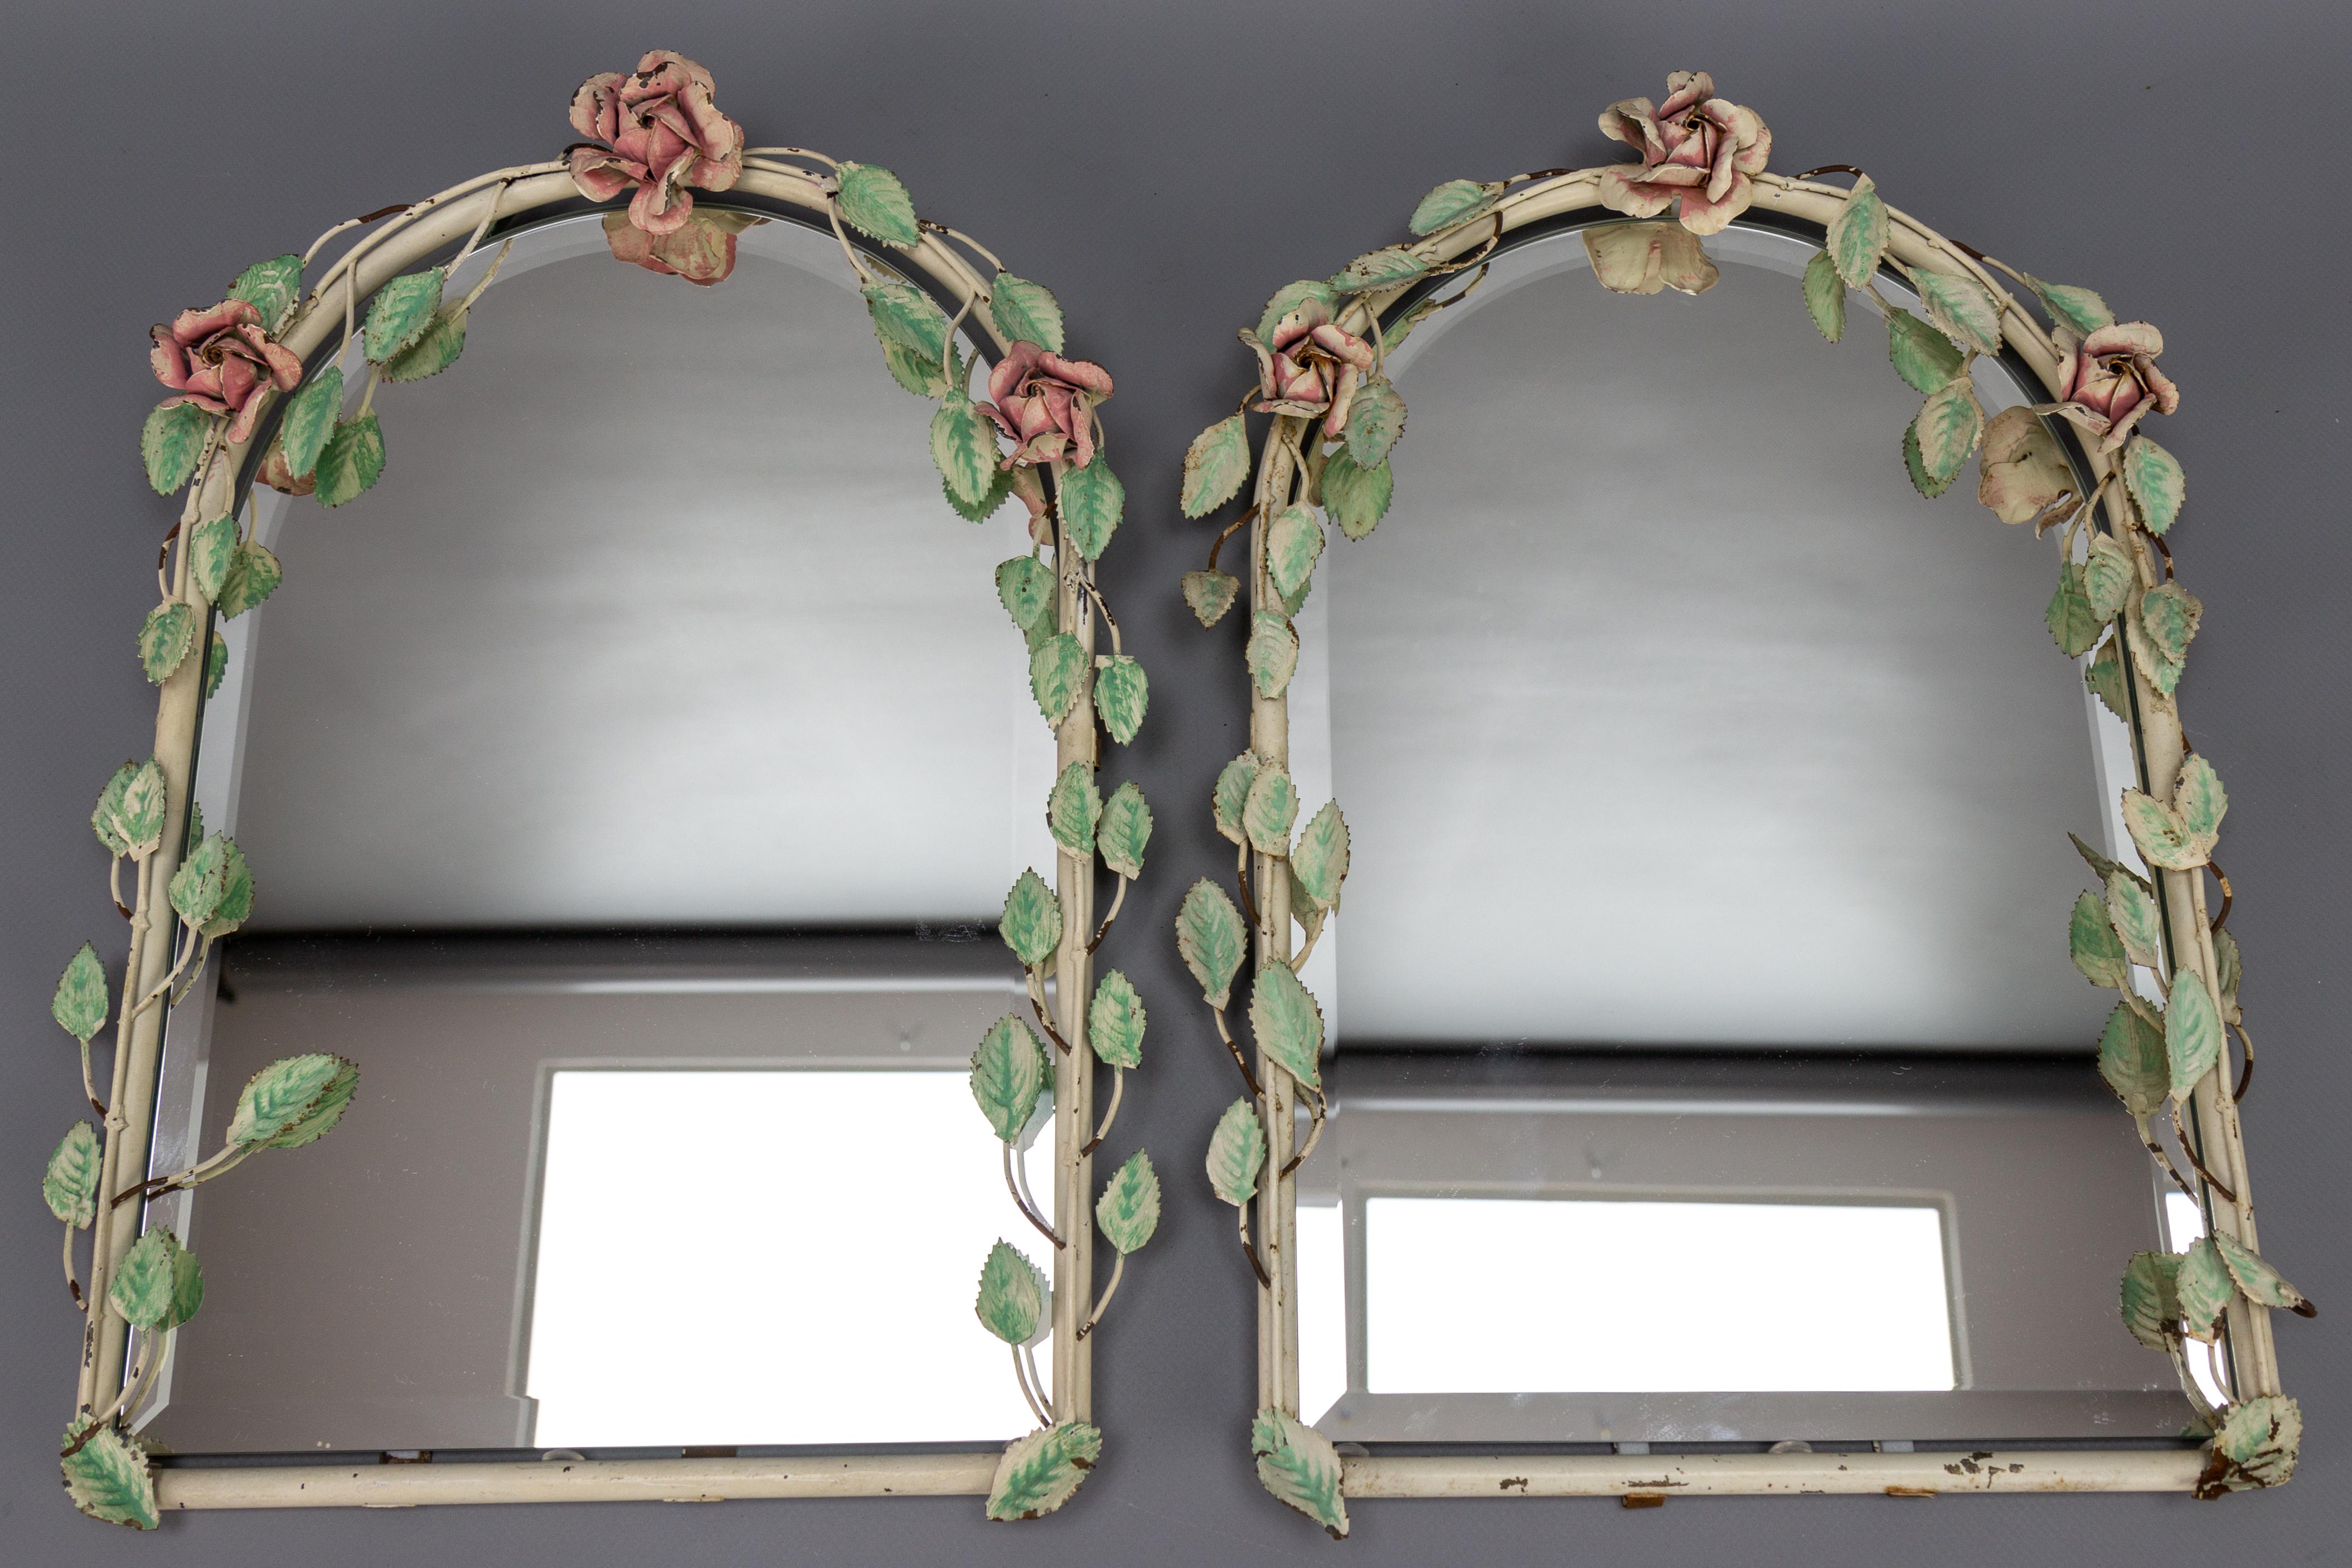 Pair of Italian painted tole flower wall mirrors, 1950s.
This beautiful pair of Italian wall mirrors features a tole-painted pastel color frame with roses and rose leaves and beveled edge mirrors.
In good condition with some flaking to paint and